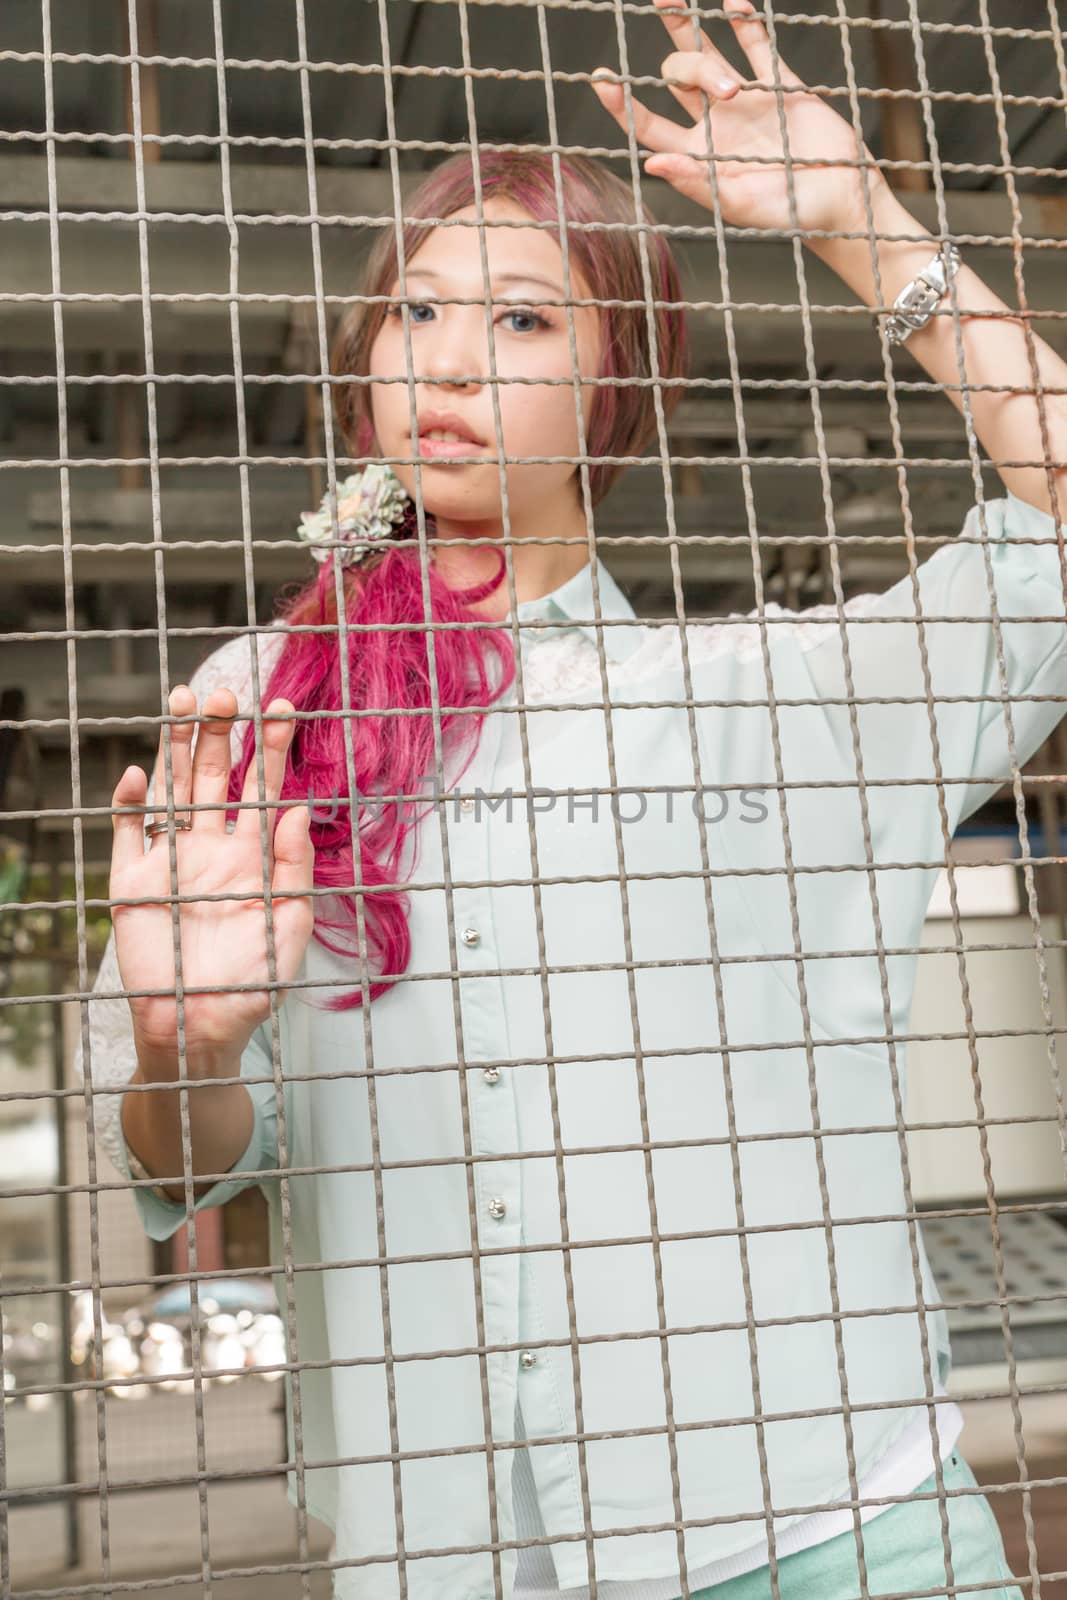 Asian woman behind a metal fence by imagesbykenny